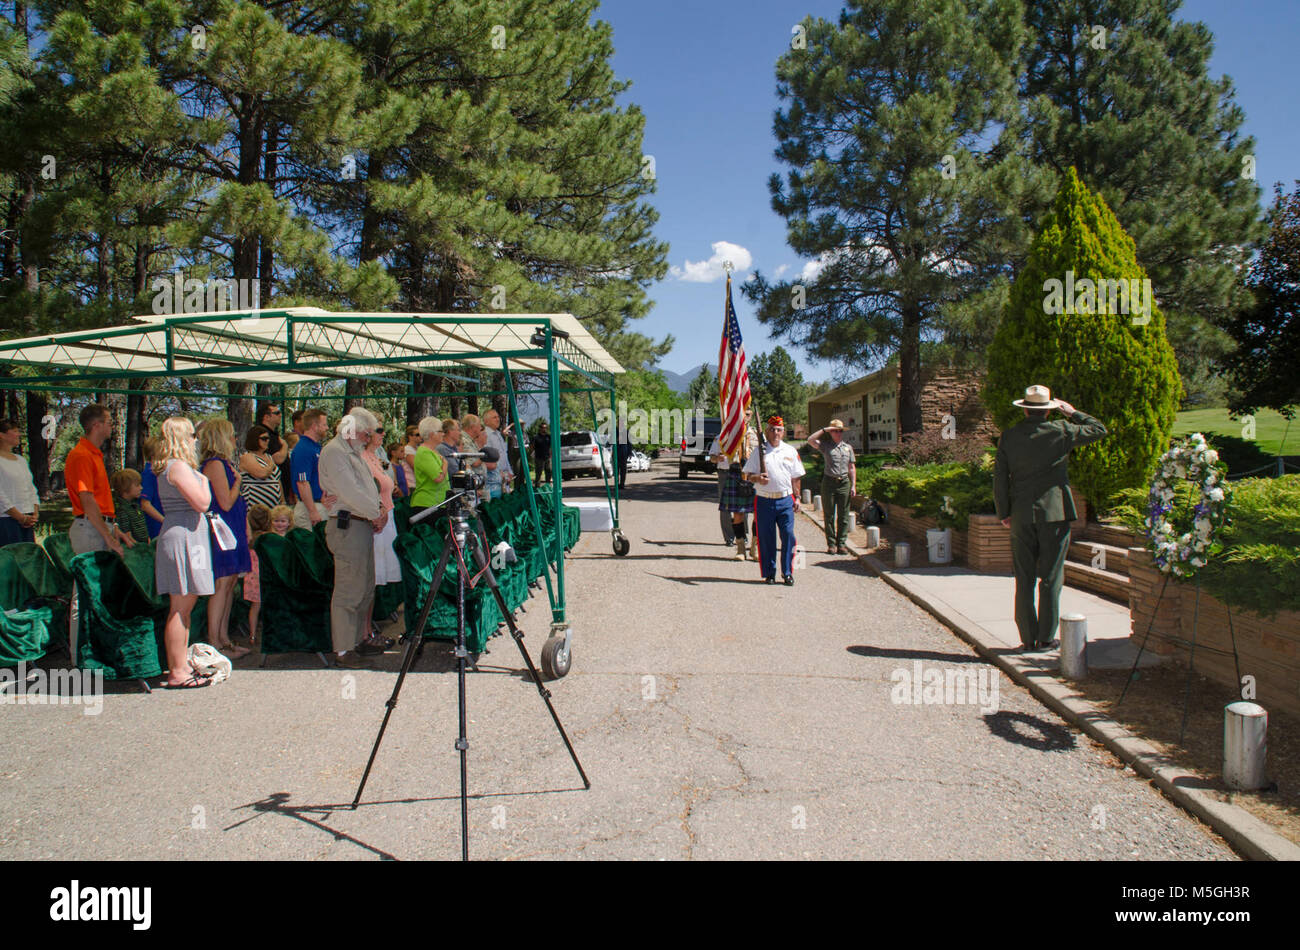 June ,  Wrea laying ceremony - Citizens Cemetery, Flagstaff  Flagstaff American Legion Post 3, the Scottish American Military Society, and Veterans of Foreign Wars Post 1709 posting the colors during the memorial wreath laying ceremony at Citizens Cemetery, Flagstaff, AZ. Stock Photo